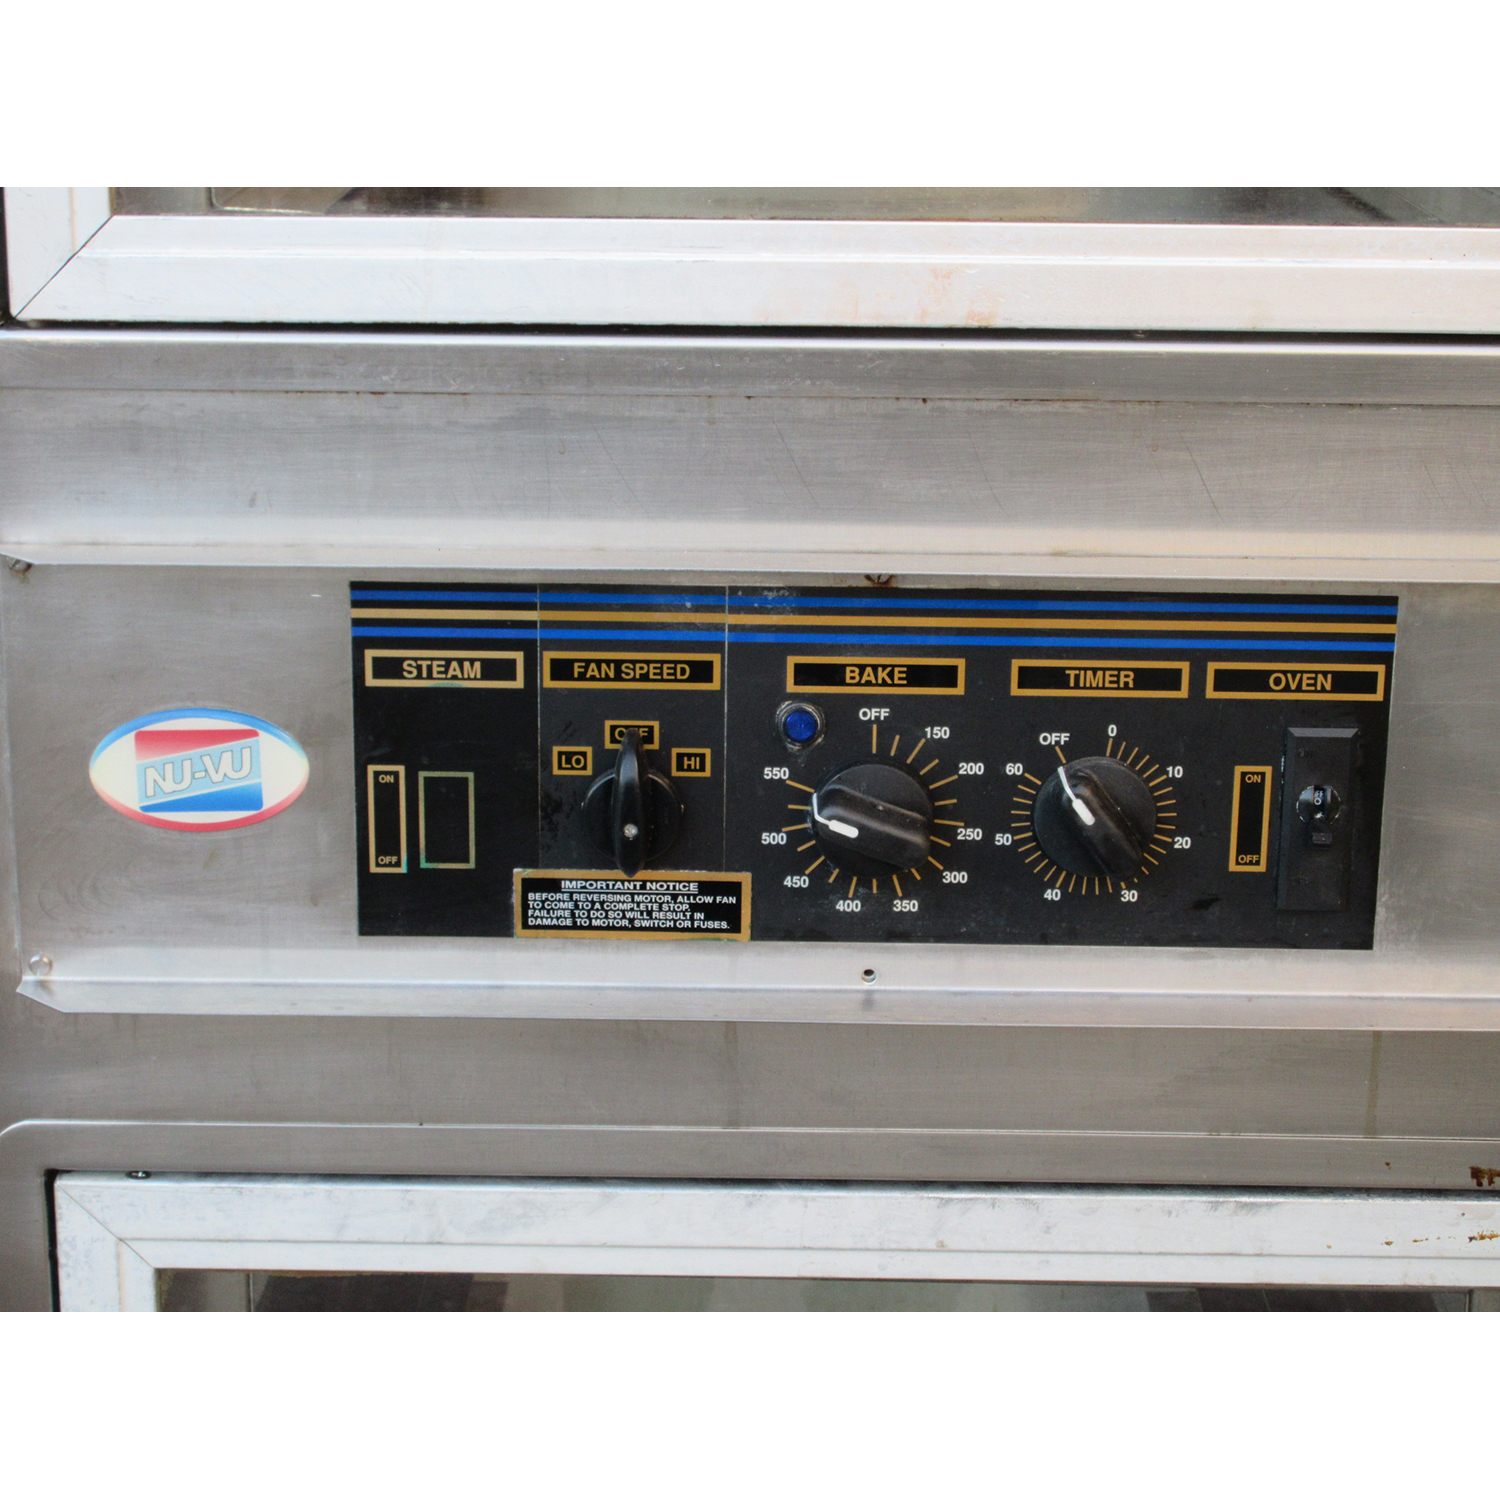 Nu-Vu UB-E5/5 Oven, Used Excellent Condition image 1